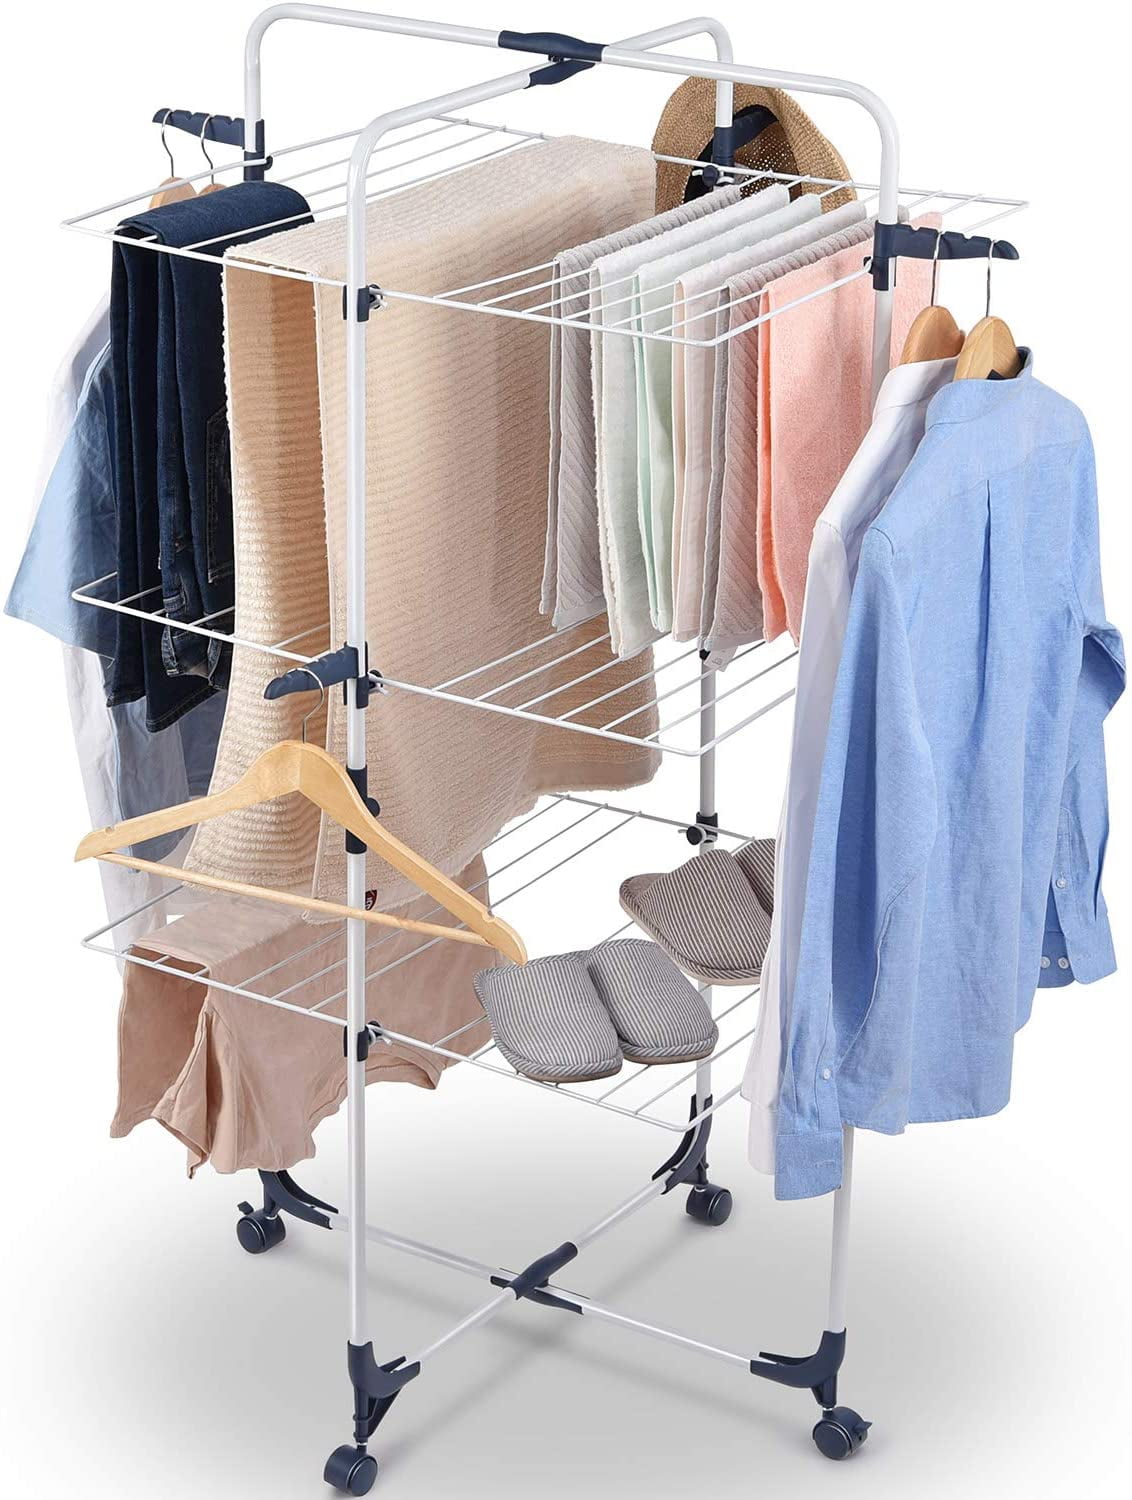 3 Tier Clothes Drying Rack Line Laundry Dryer Indoor Retractable Folding Stand 